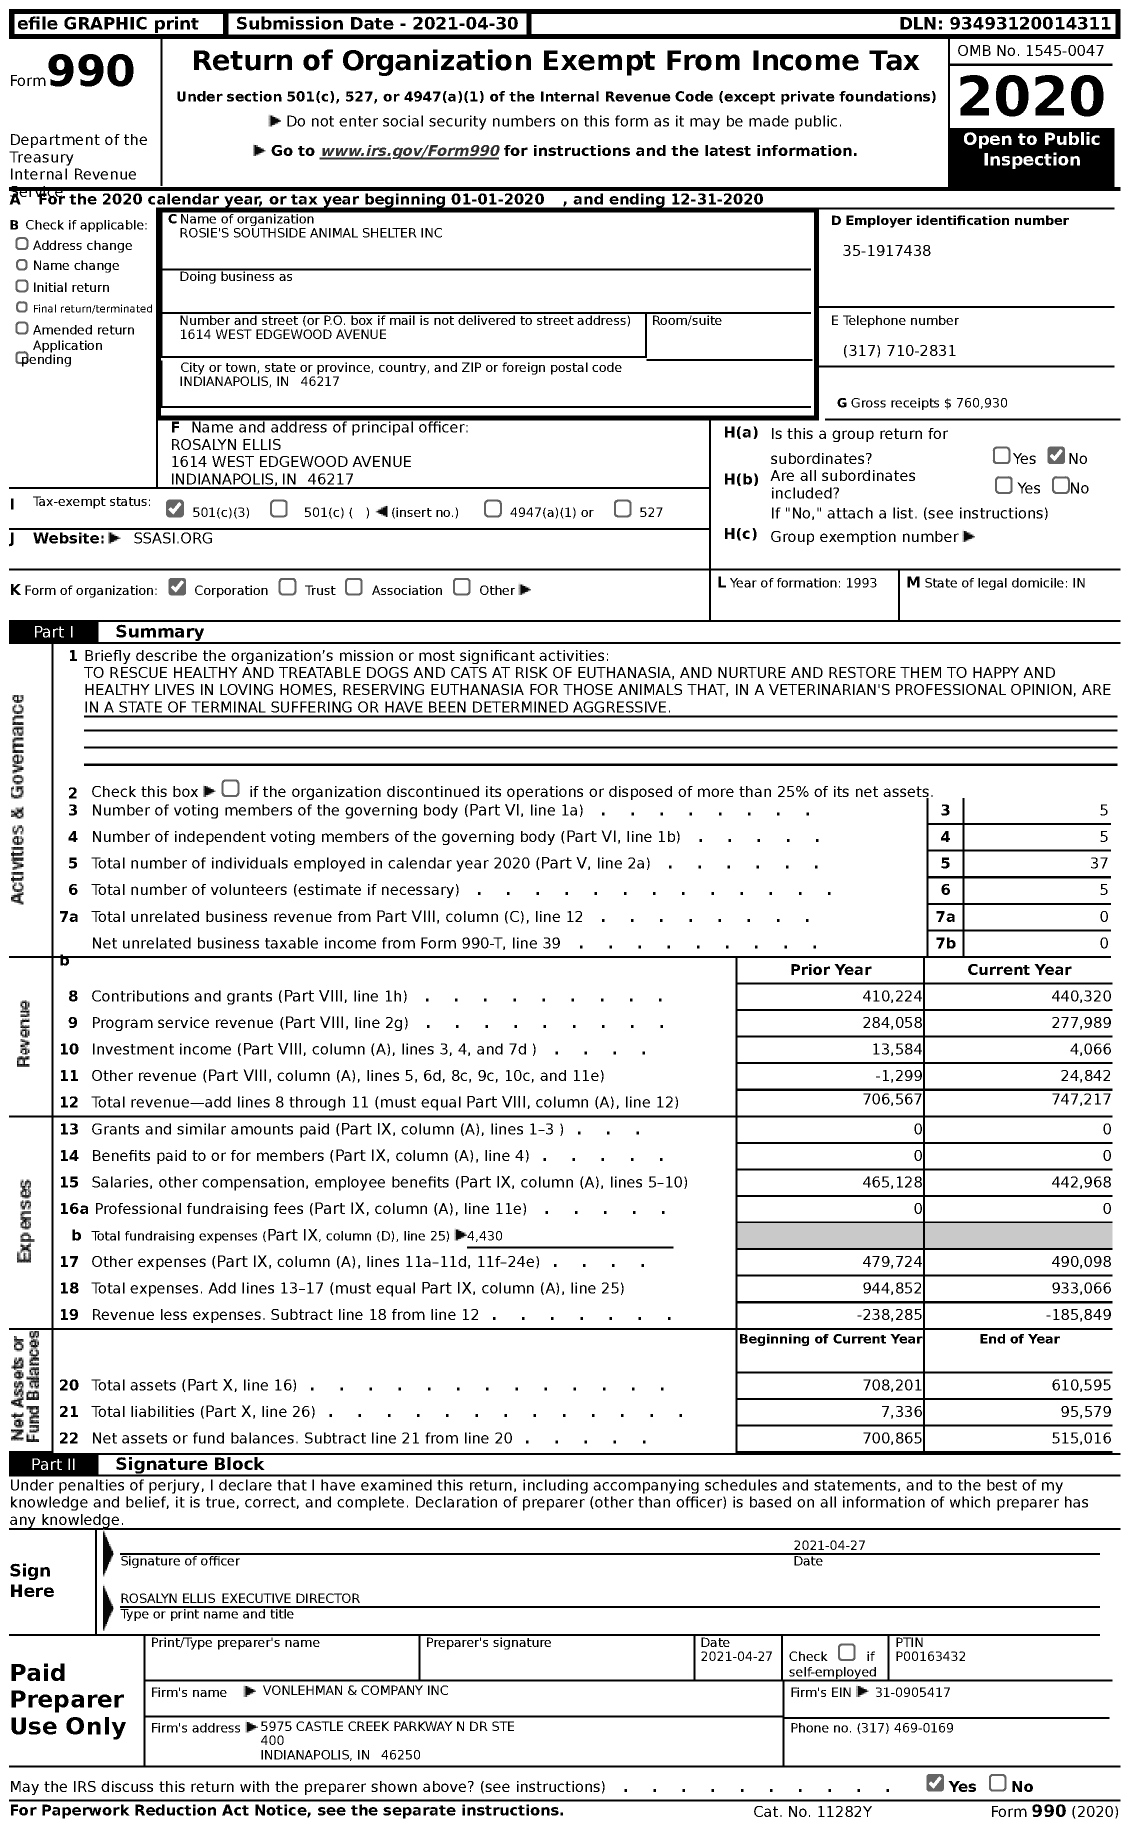 Image of first page of 2020 Form 990 for Rosie's Southside Animal Shelter (SSASI)